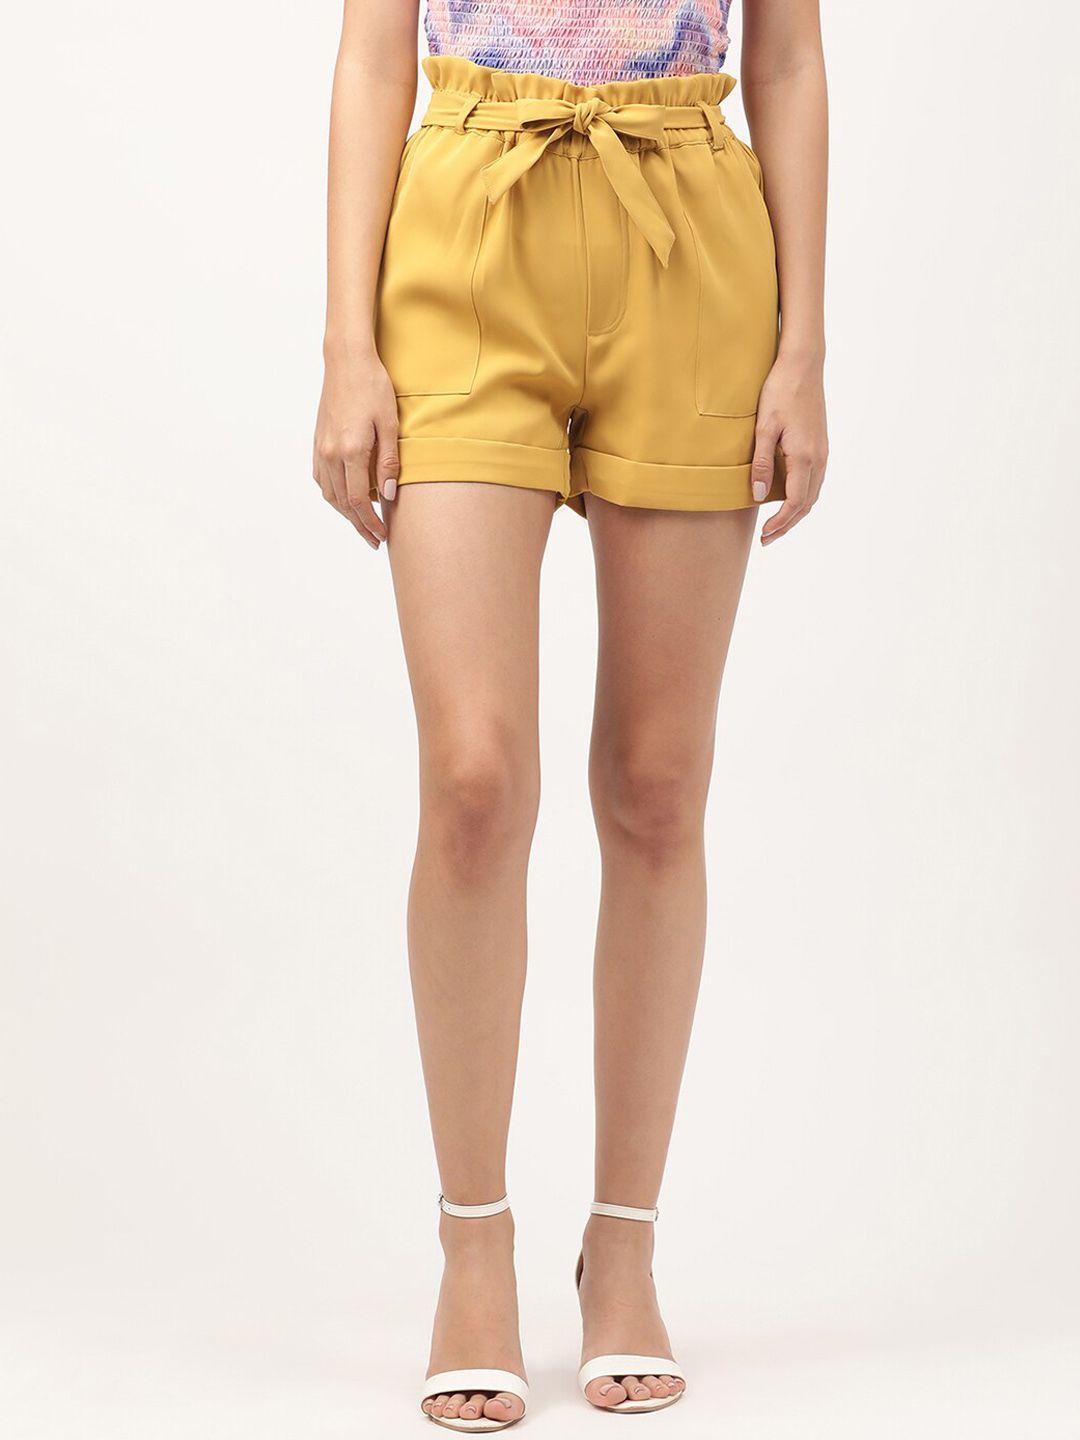 centrestage-women-yellow-solid-shorts